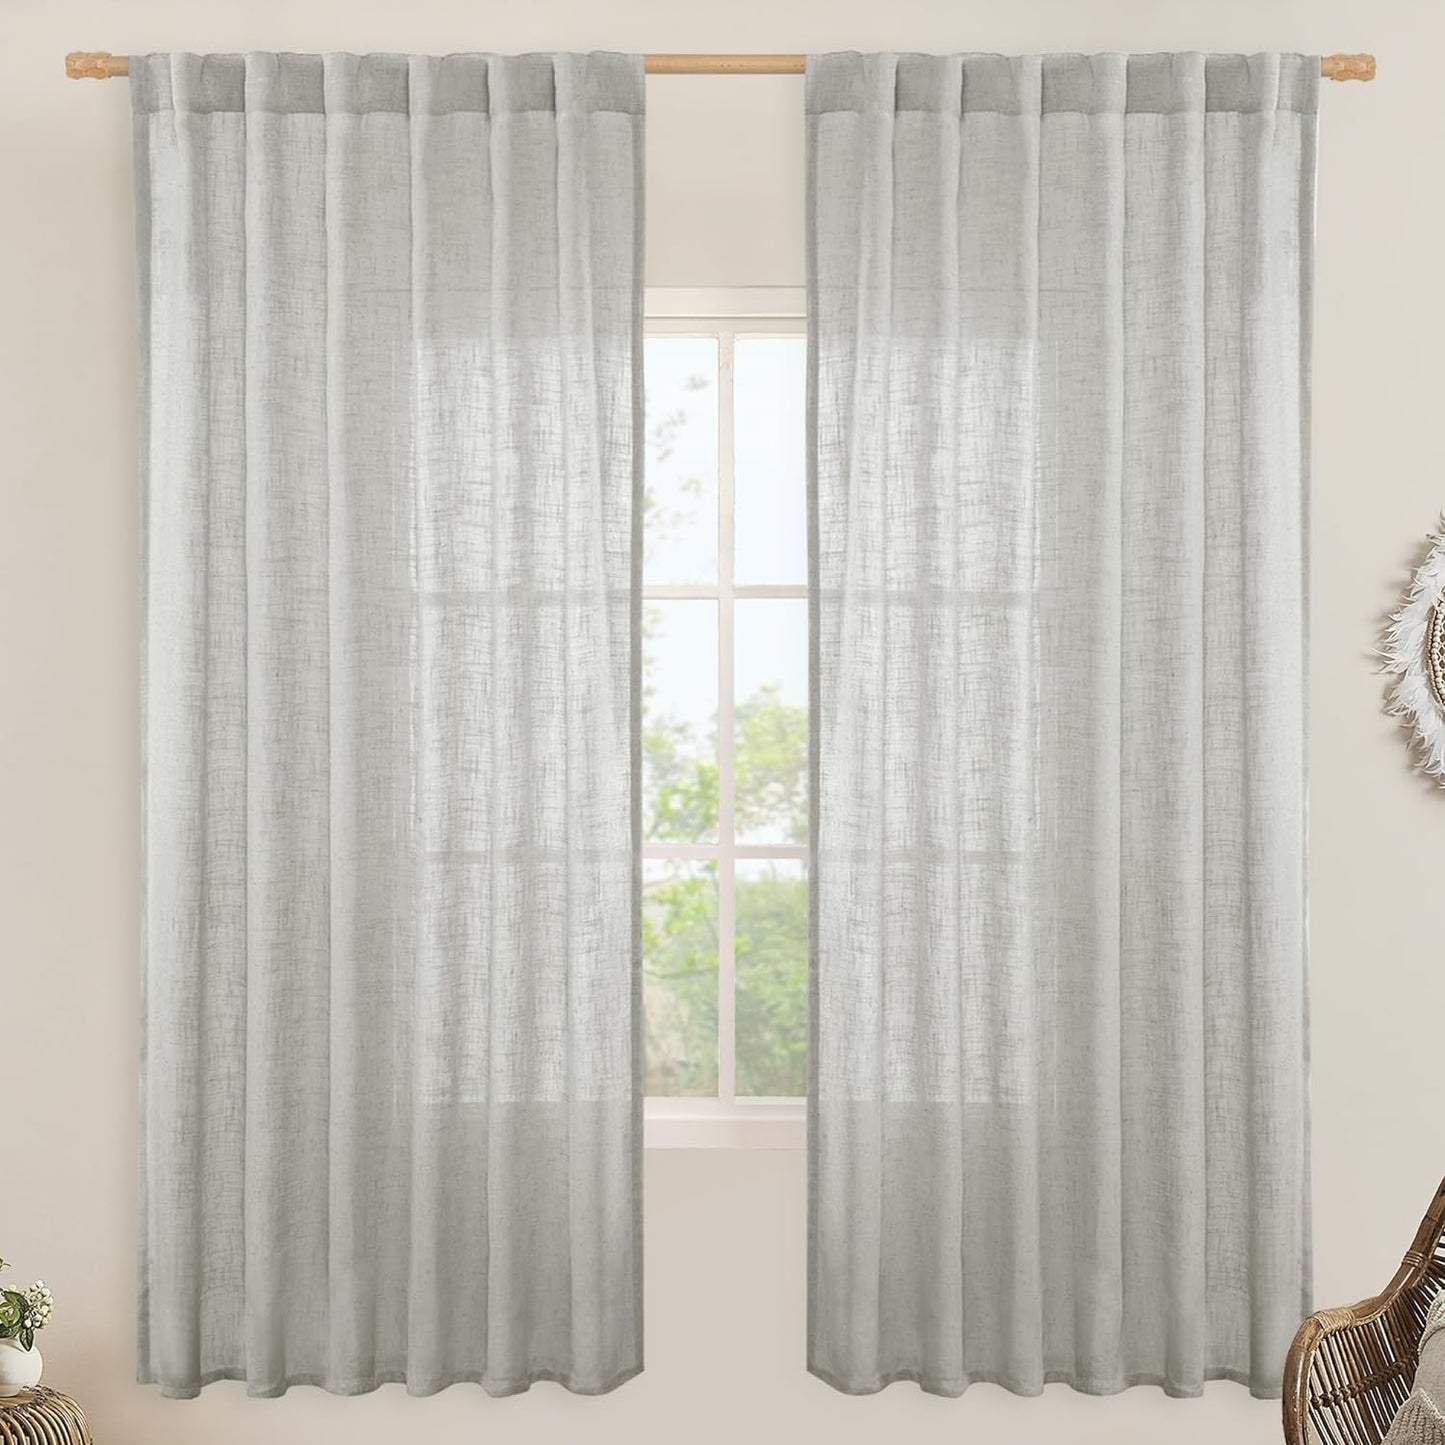 LAMIT Natural Linen Blended Curtains for Living Room, Back Tab and Rod Pocket Semi Sheer Curtains Light Filtering Country Rustic Drapes for Bedroom/Farmhouse, 2 Panels,52 X 108 Inch, Linen  LAMIT Light Grey 52W X 72L 